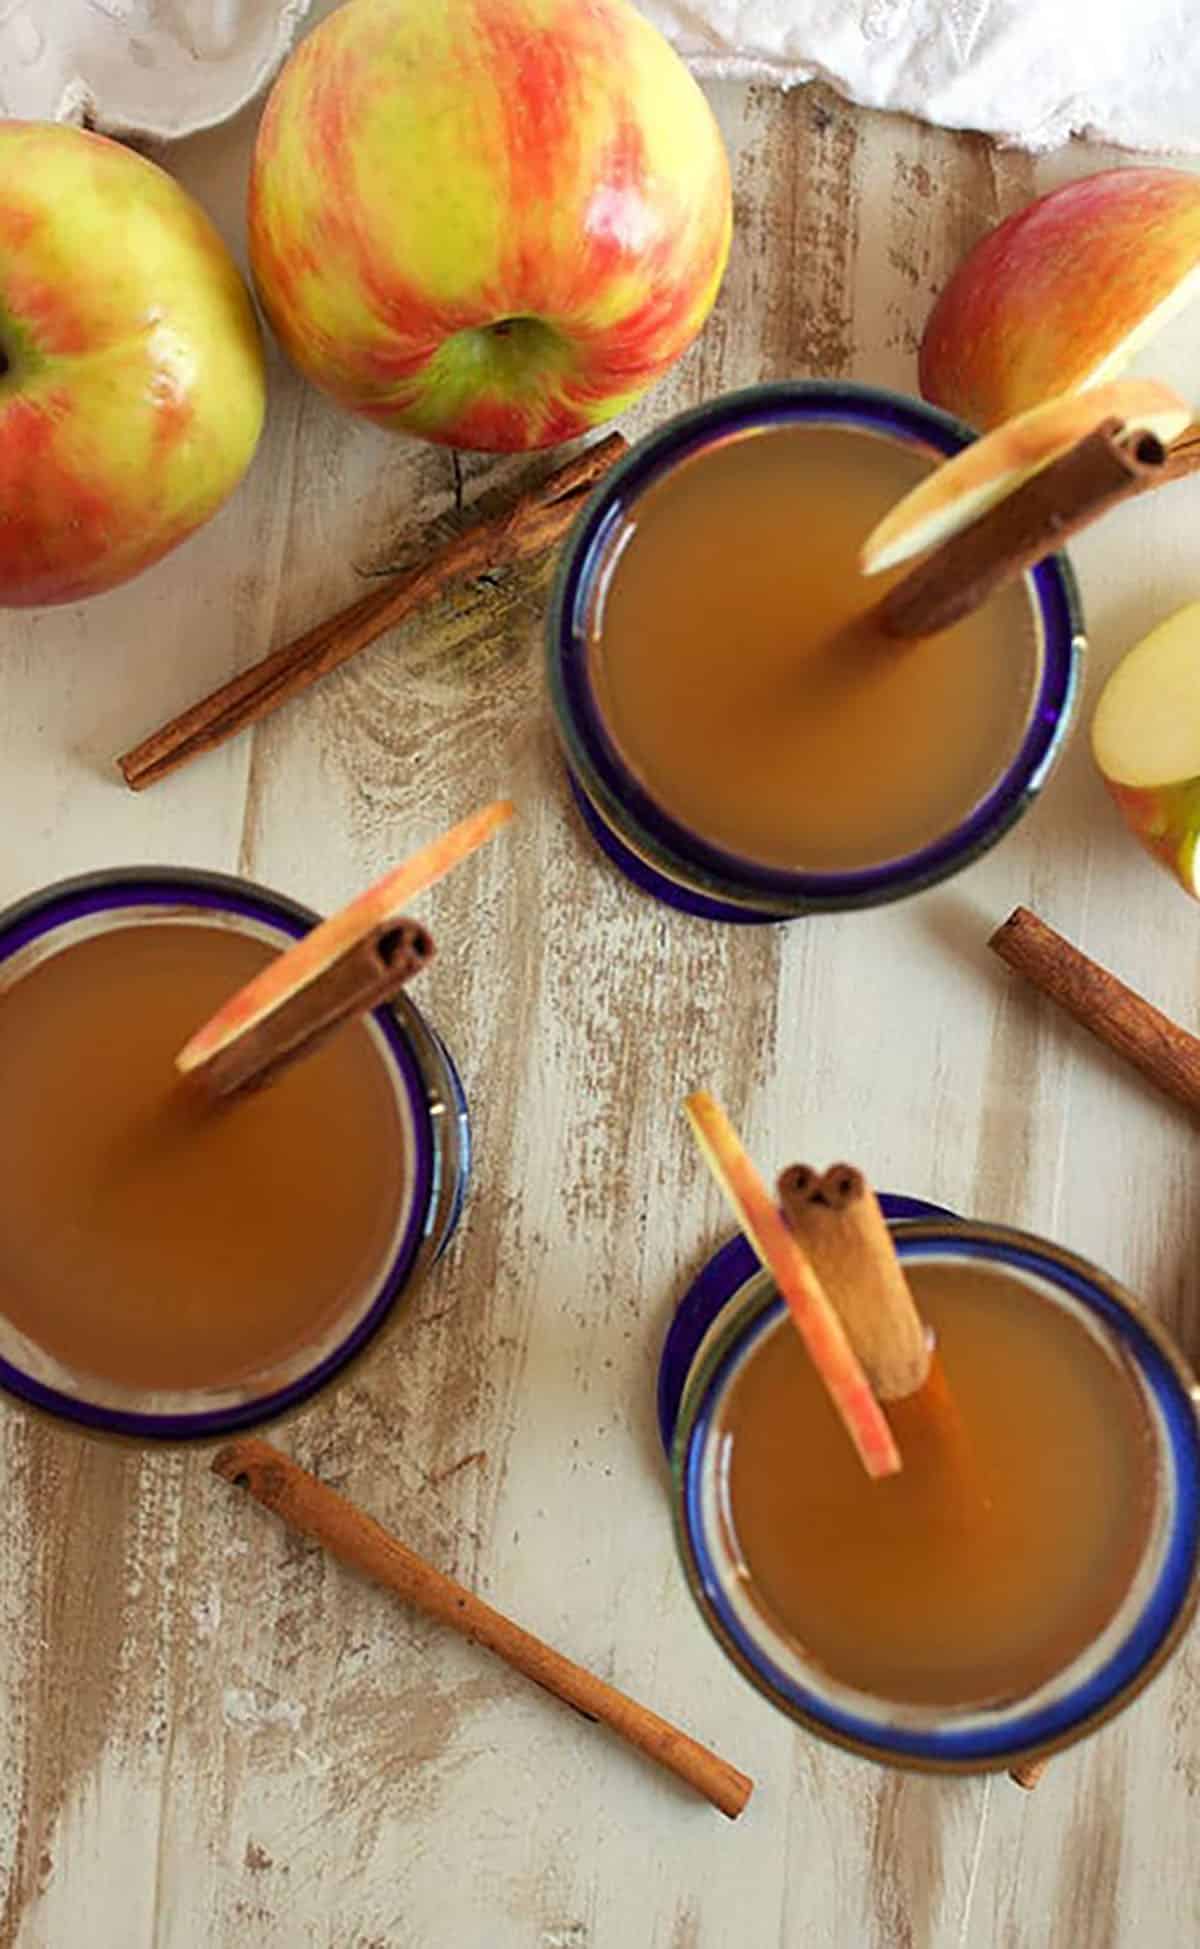 three glasses filled with apple cider with cinnamon sticks on a distressed wood background with apples.